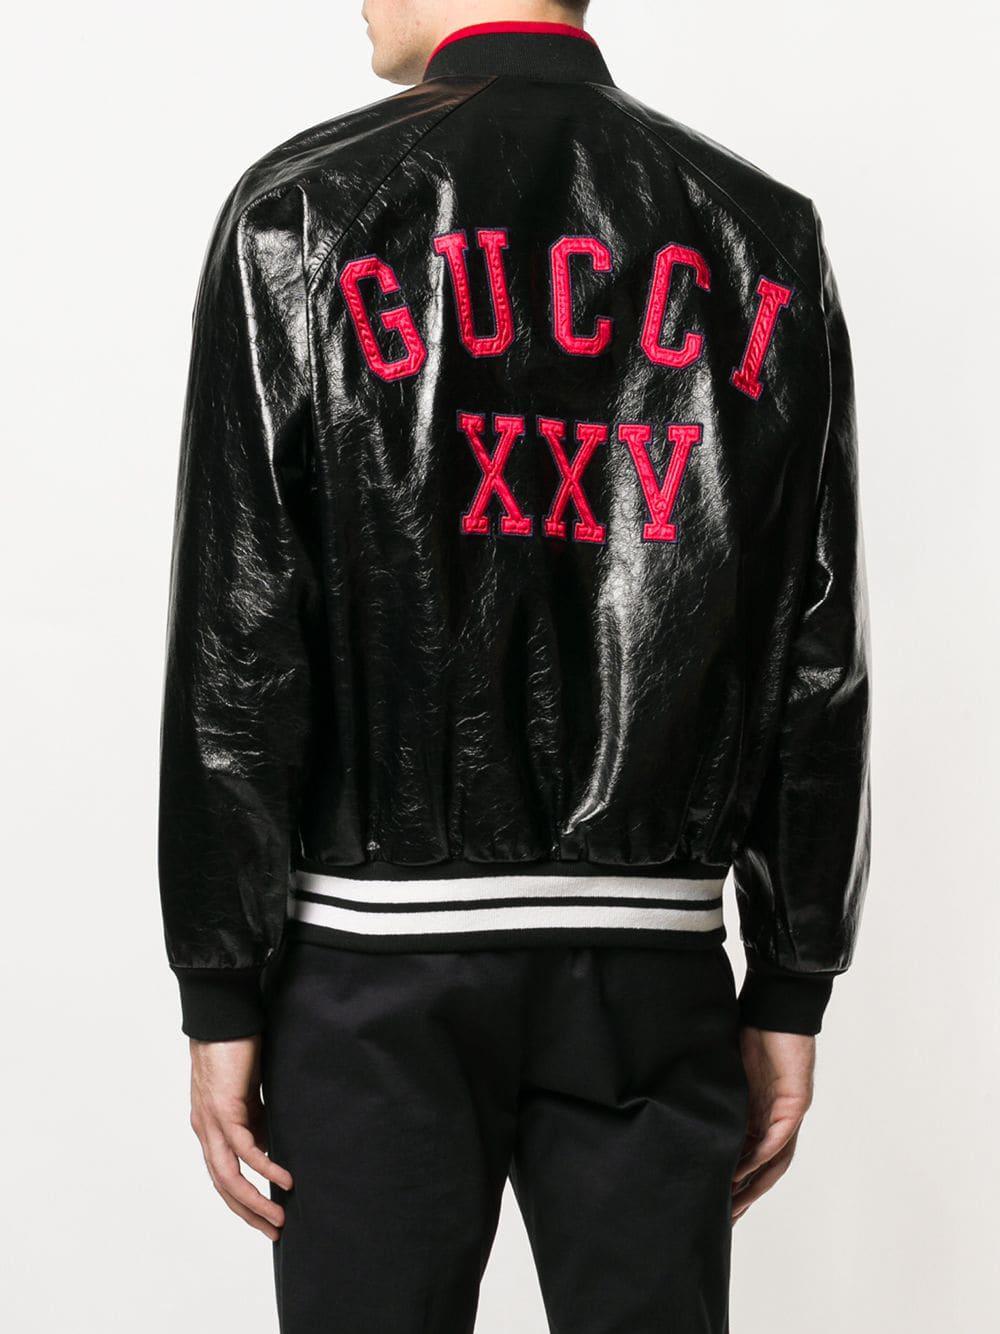 Gucci Ny Yankees Bomber Jacket in Black for Men | Lyst